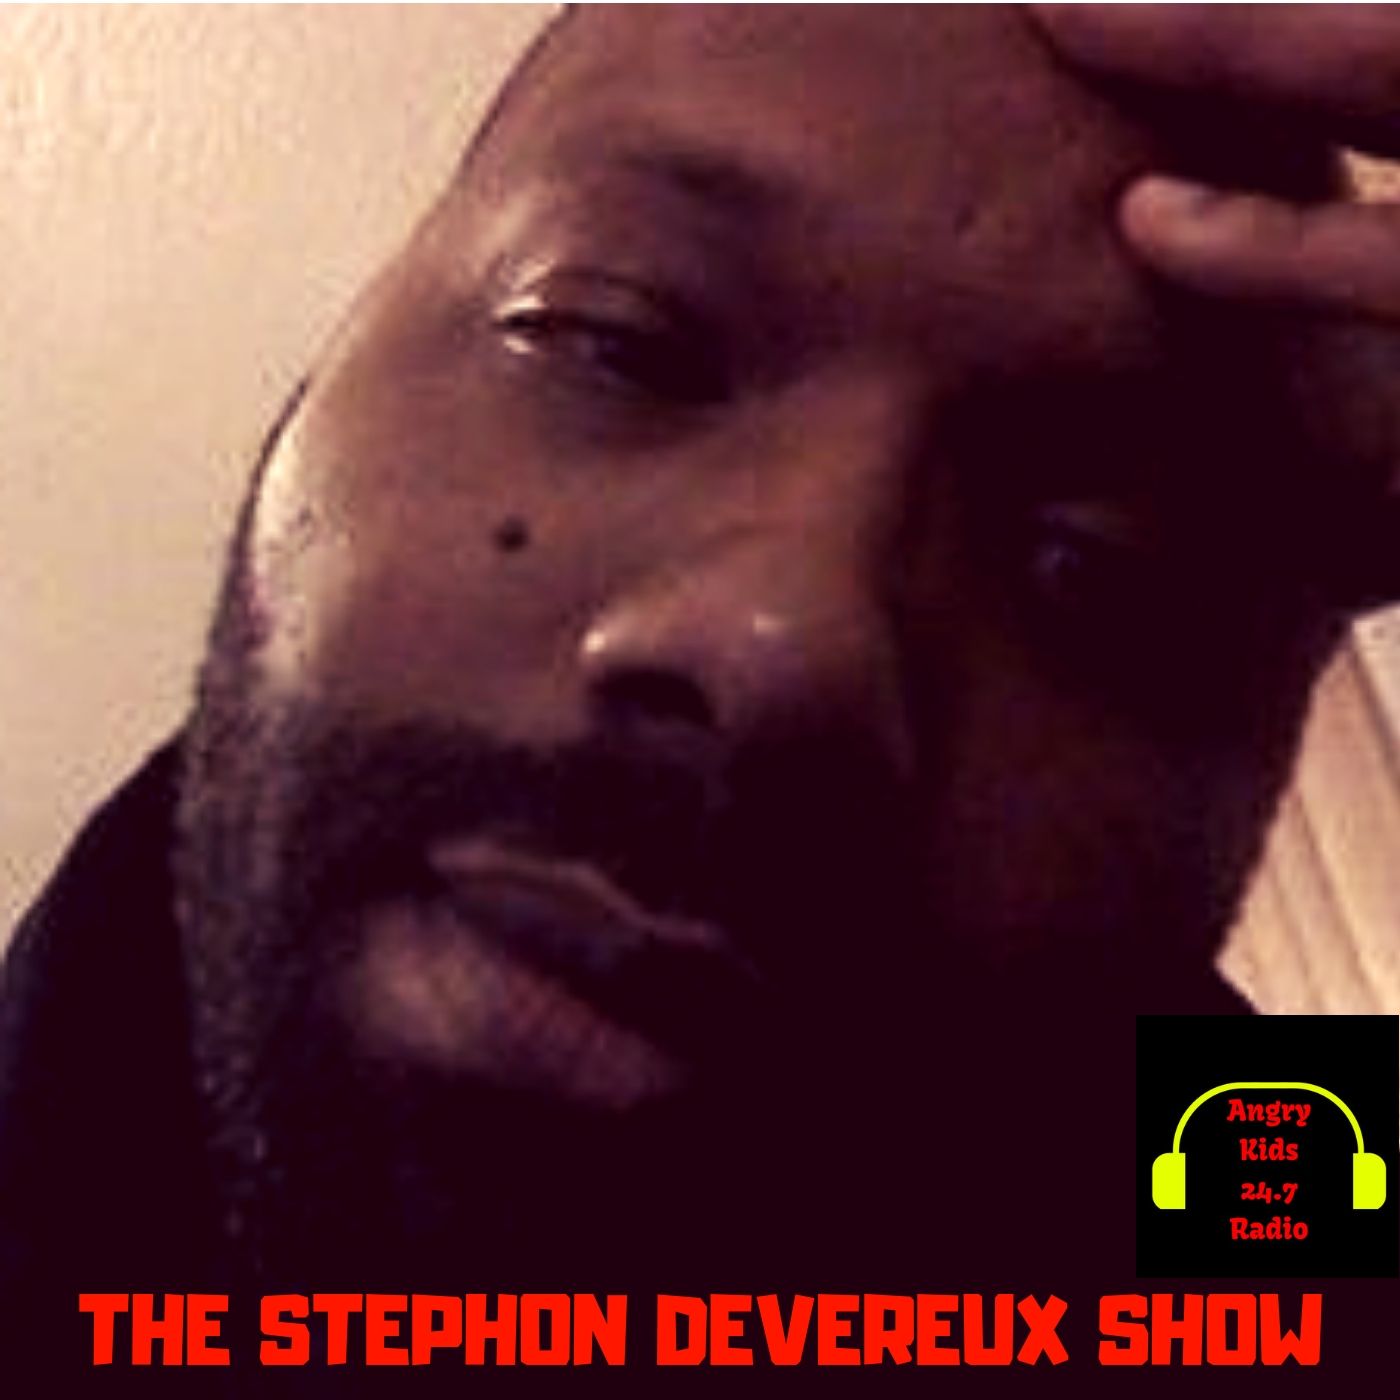 The Stephon Devereux Show - WWE Hall Of Fame Ceremony Thoughts